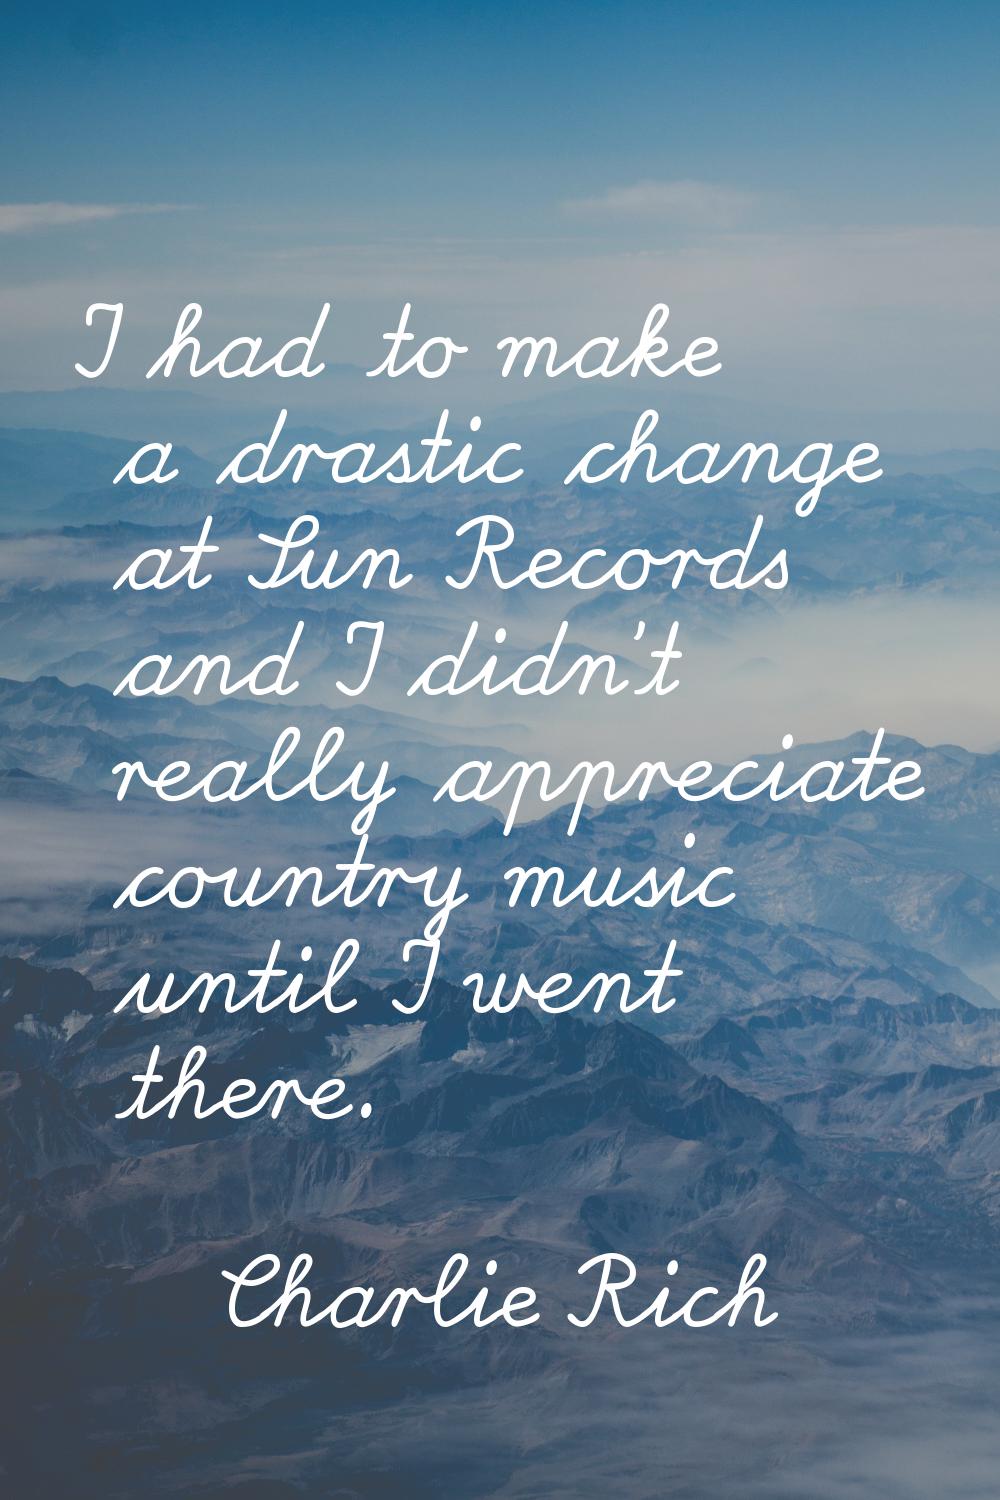 I had to make a drastic change at Sun Records and I didn't really appreciate country music until I 